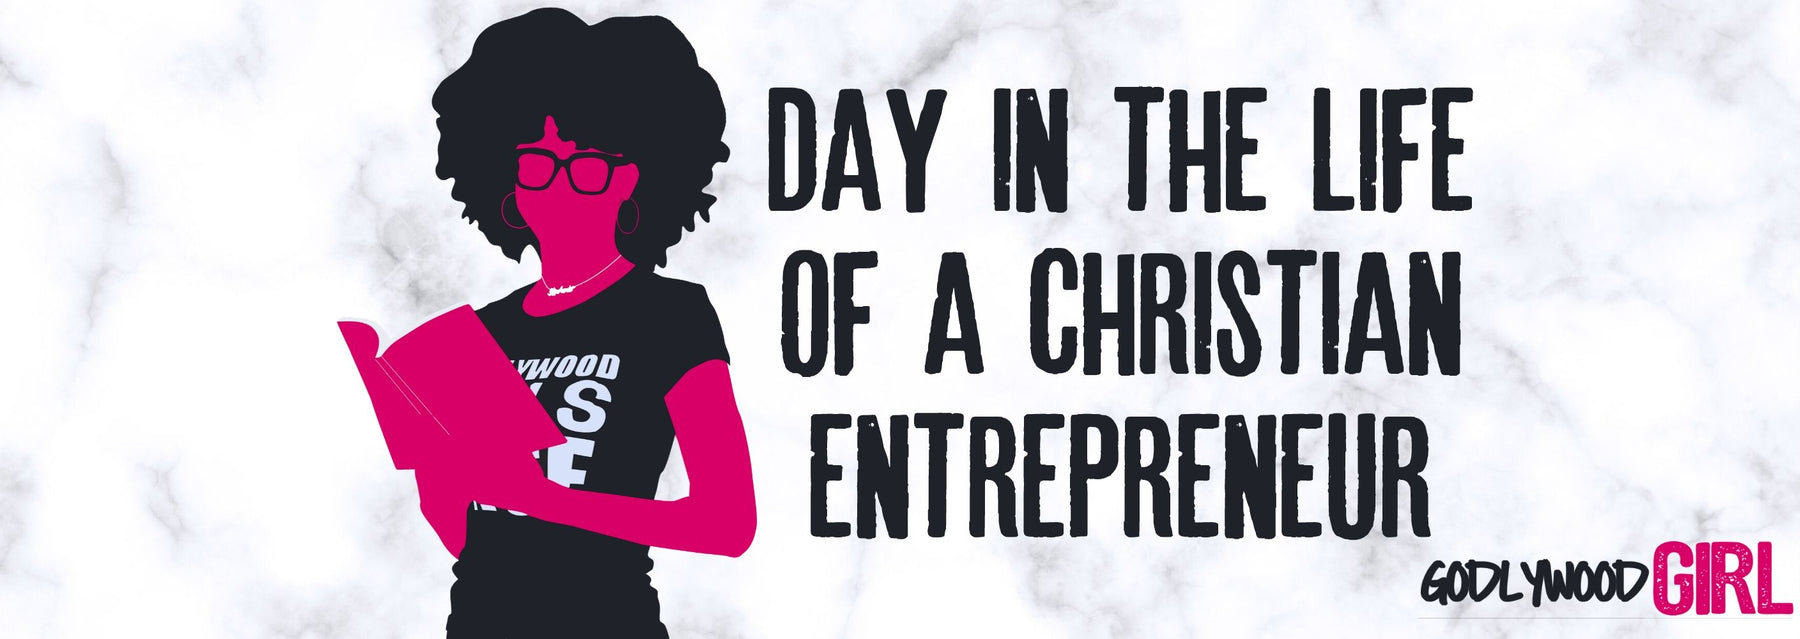 Day In The Life Of A Christian Entrepreneur Ep.84 | Social Distancing Day #5